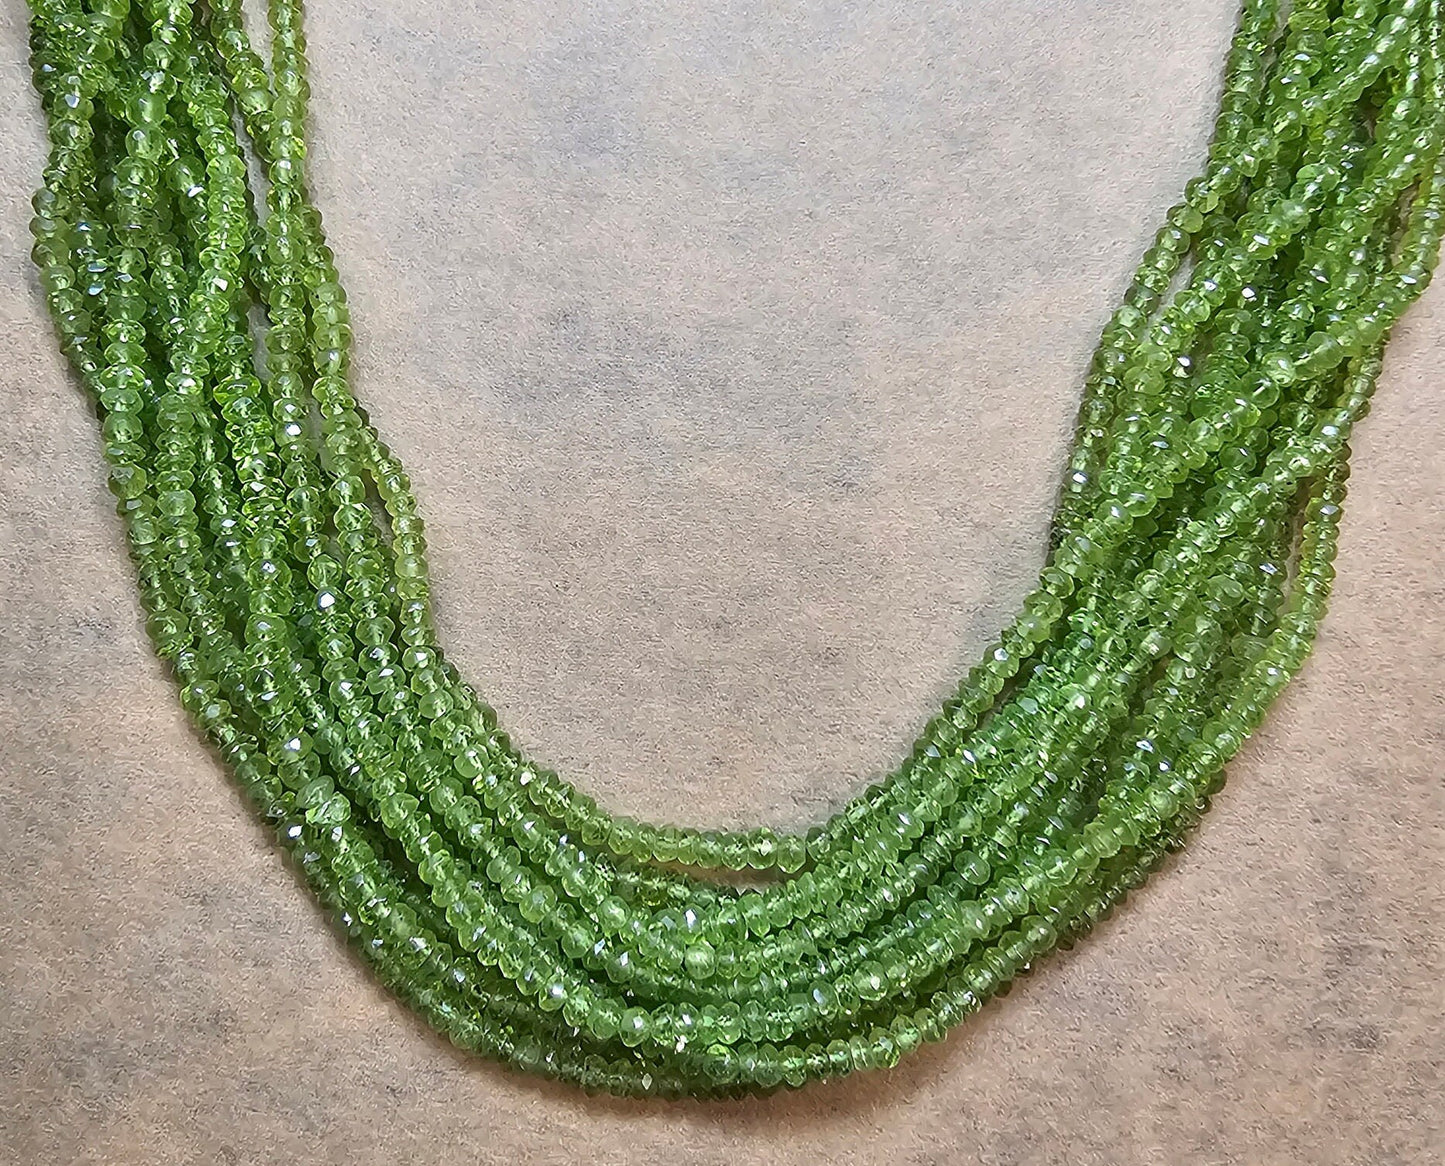 AA Peridot Gemstone Beads. Natural Rondelle Faceted Peridot Gemstone with strand length approx 14" Size 3-3.50, 3-4.50mm, 4-5mm